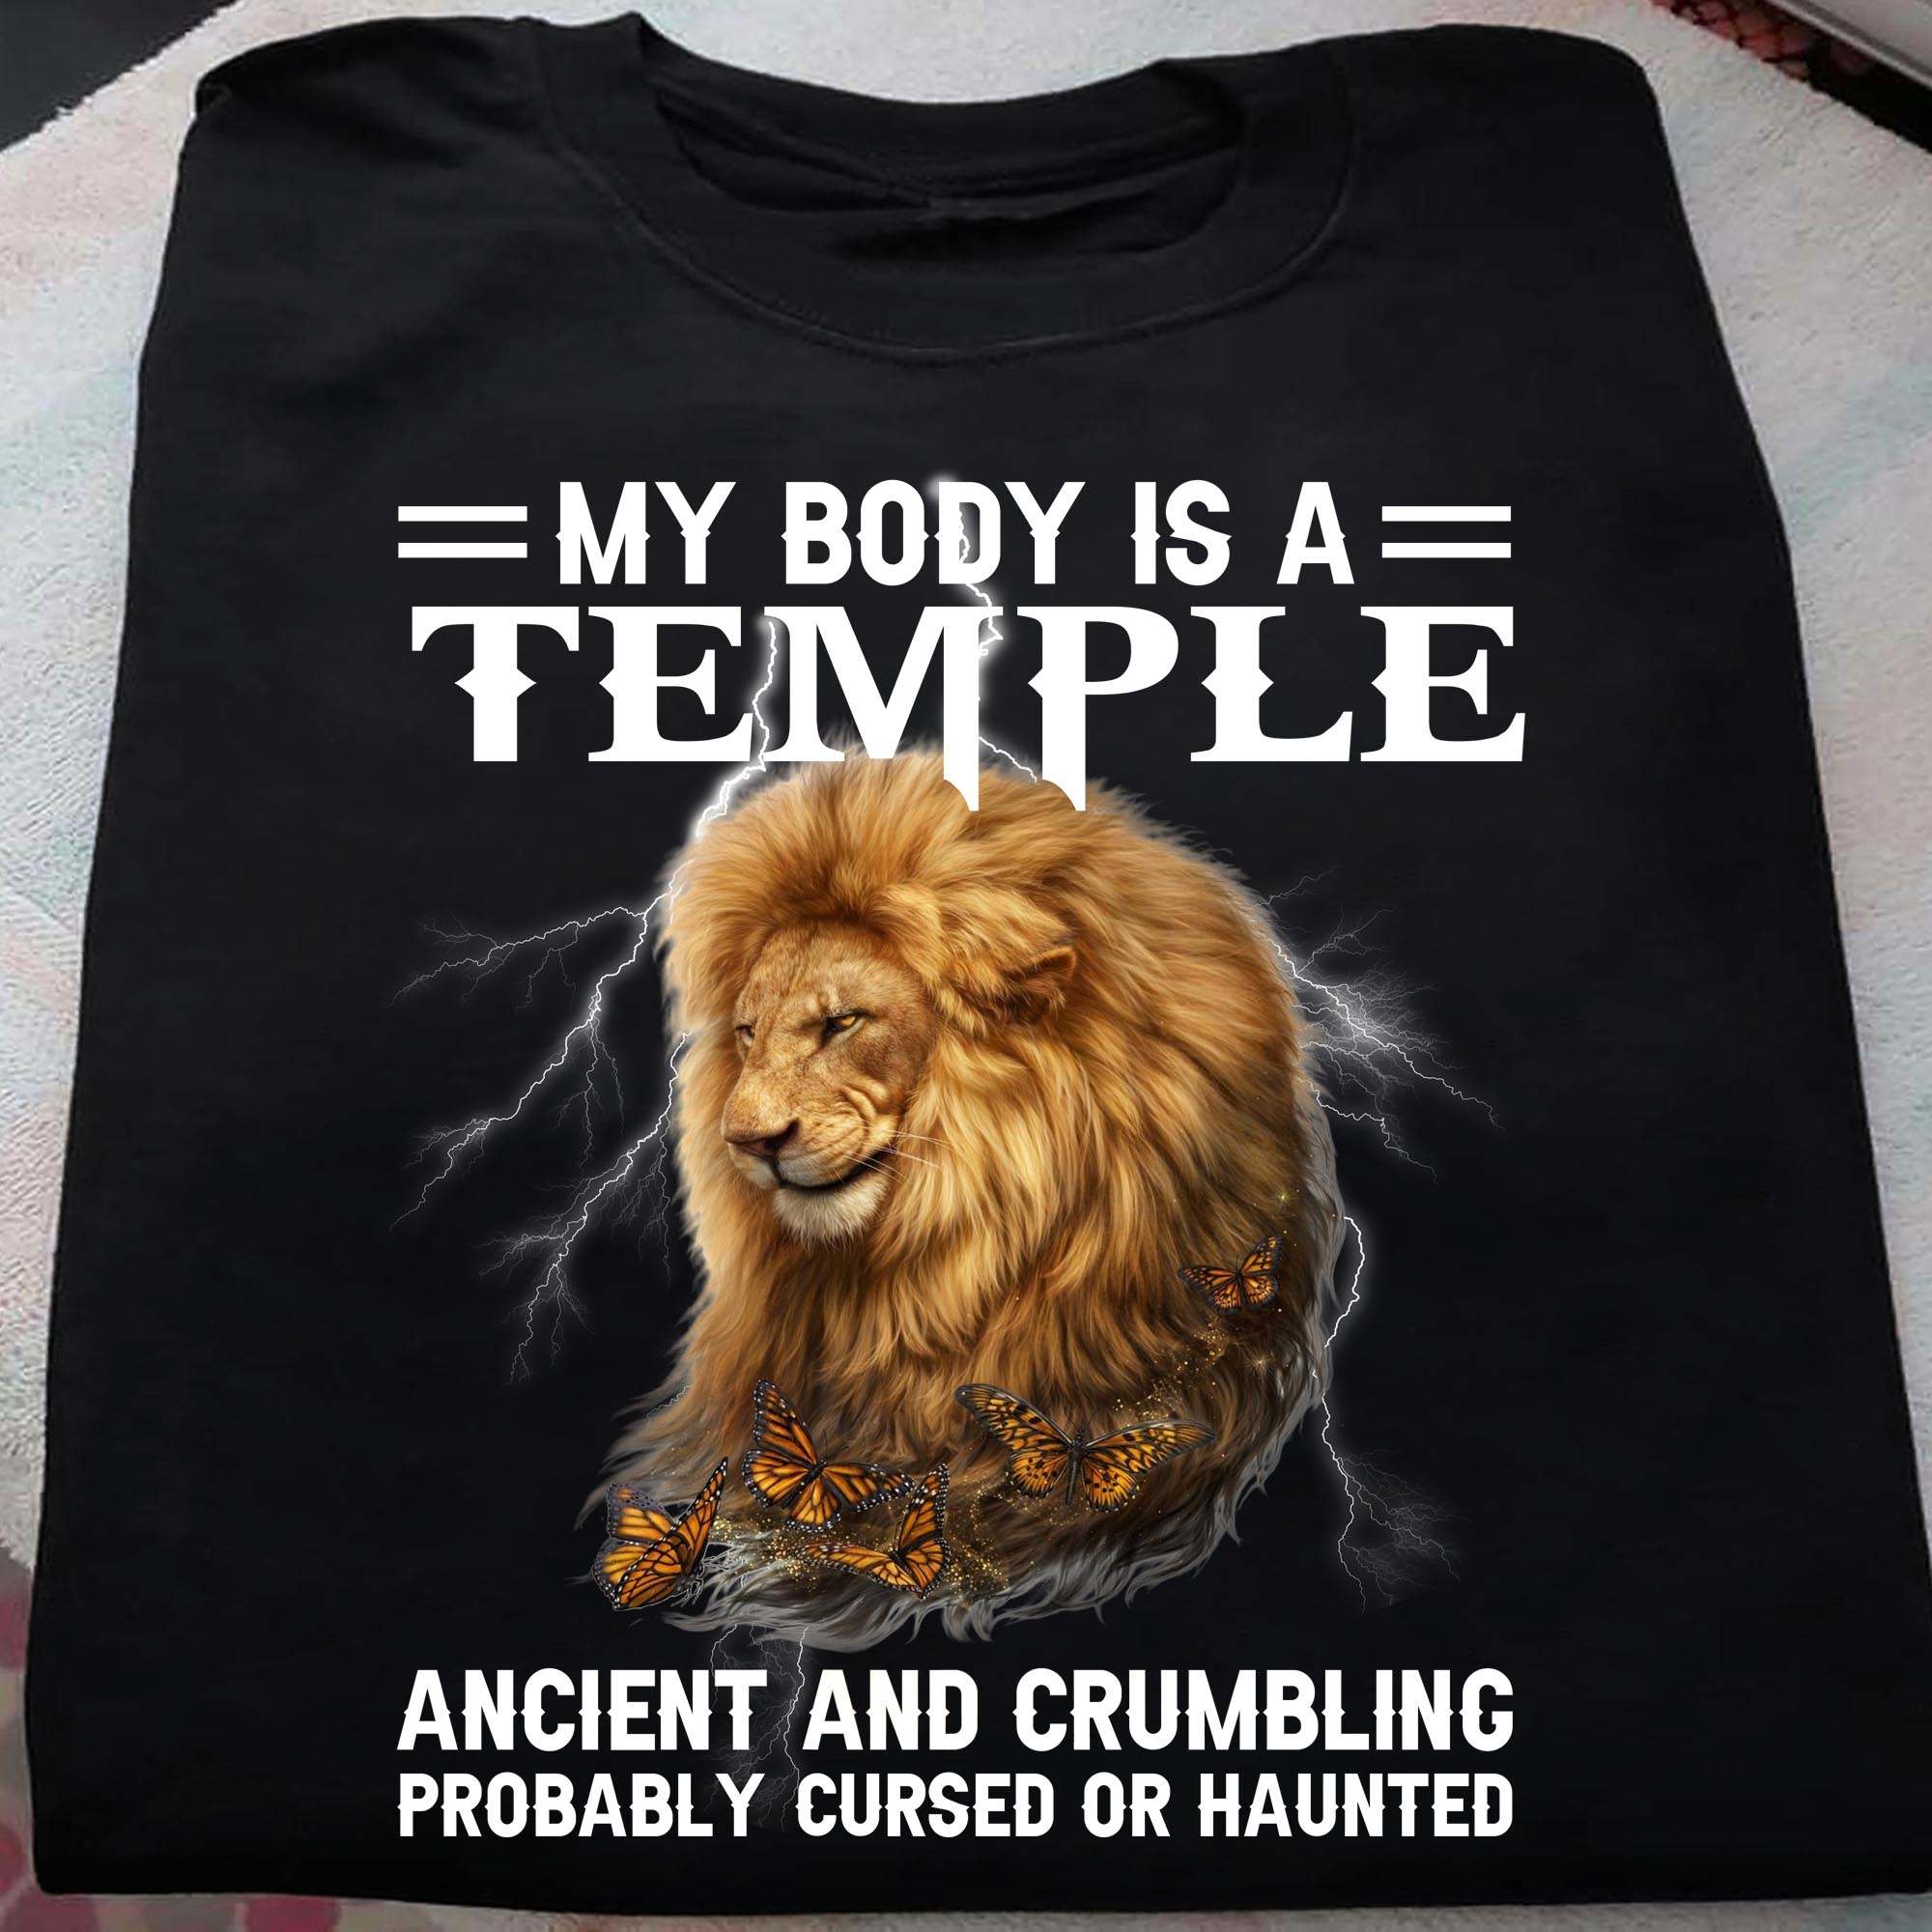 My body is a temple ancient and crumbling probably cursed or haunted - Grumpy lion